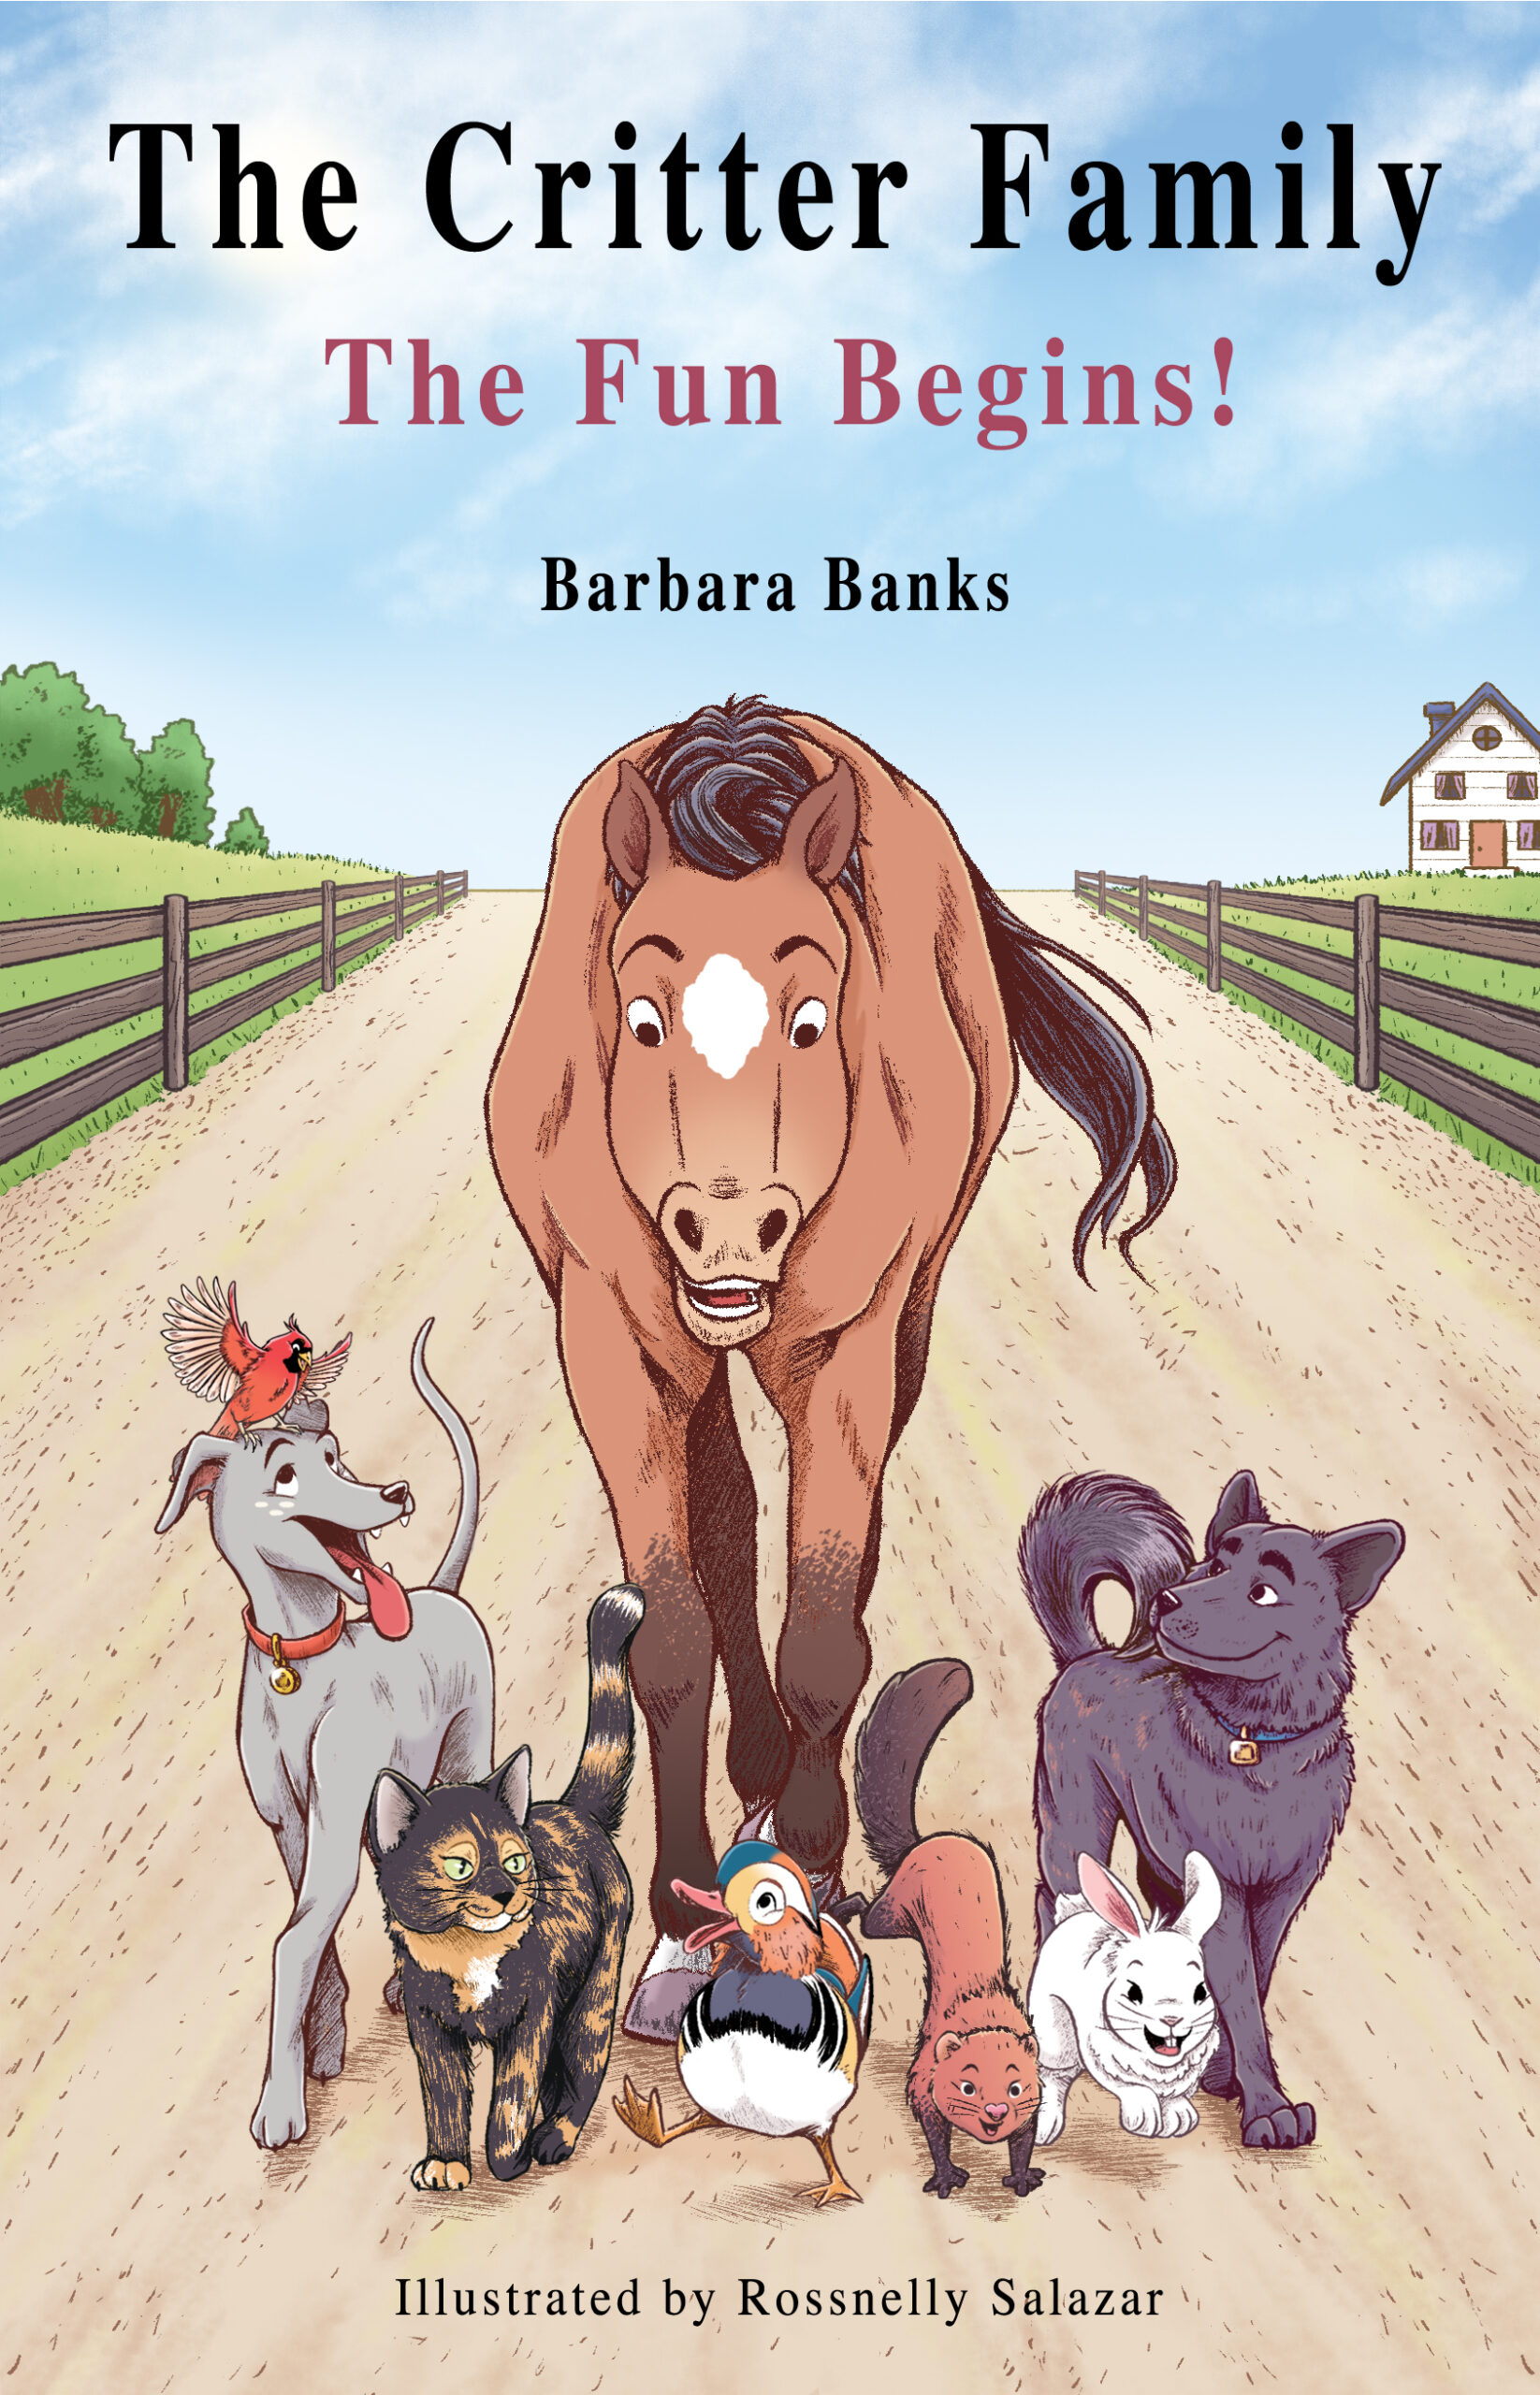 FREE: The Critter Family: The Fun Begins! by Barbara Banks